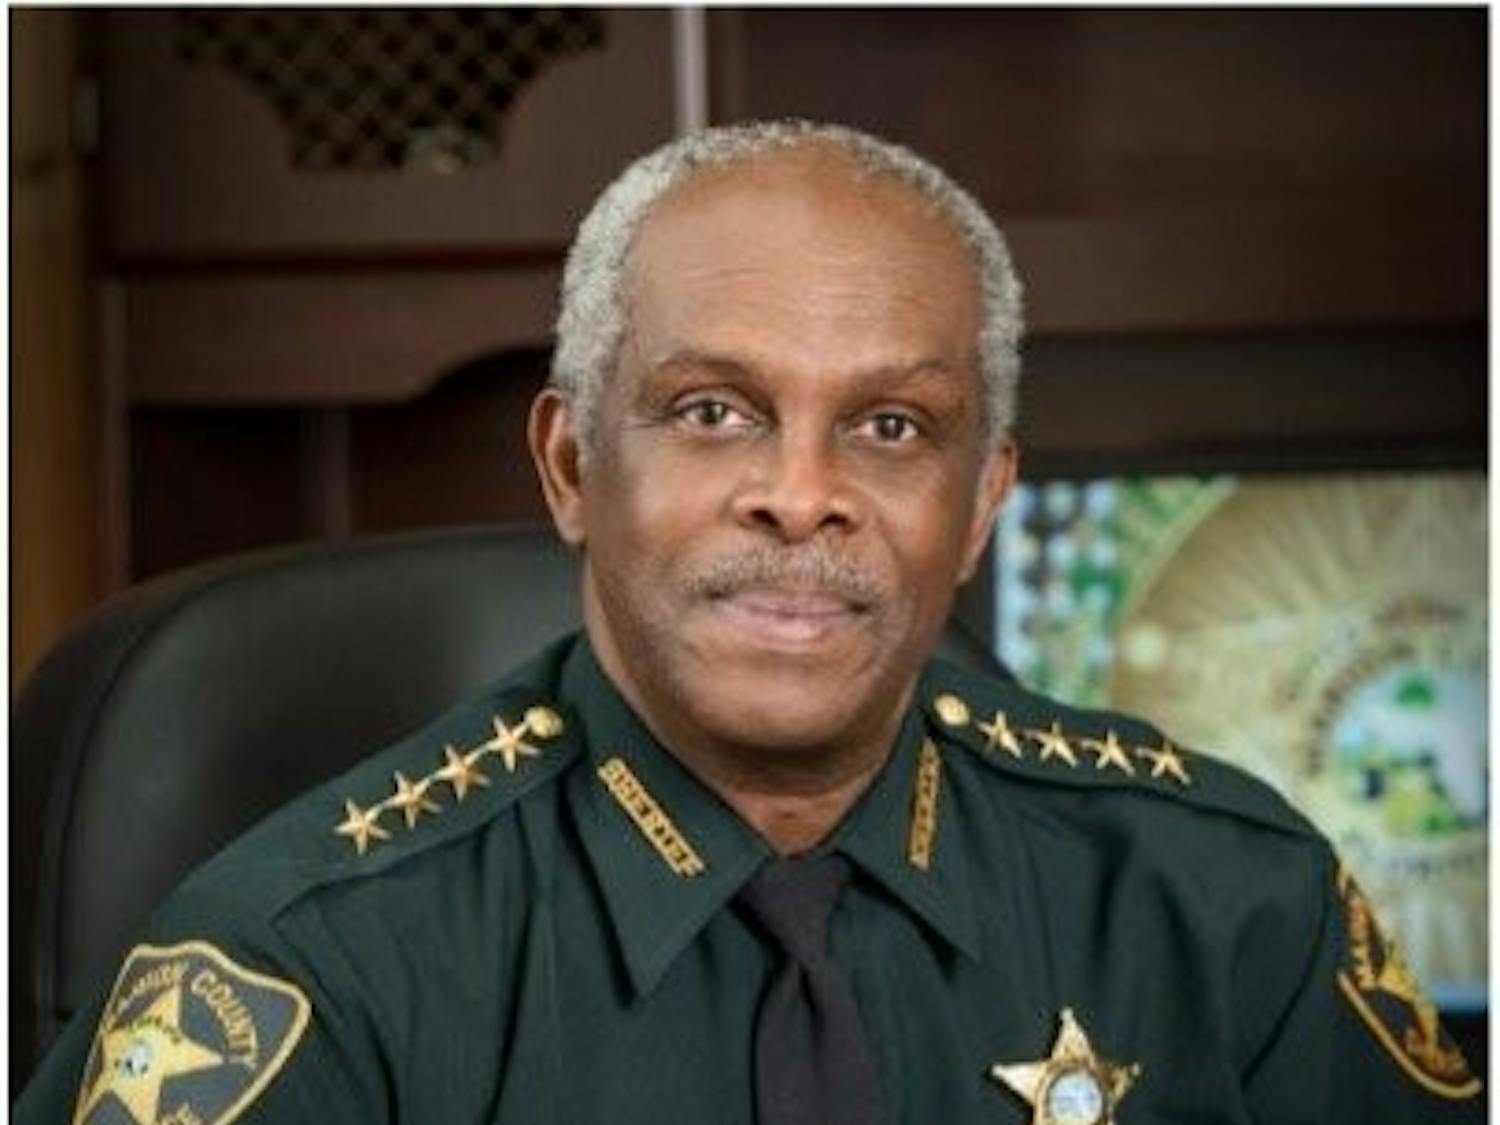 Sheriff Emery Gainey is pictured above.